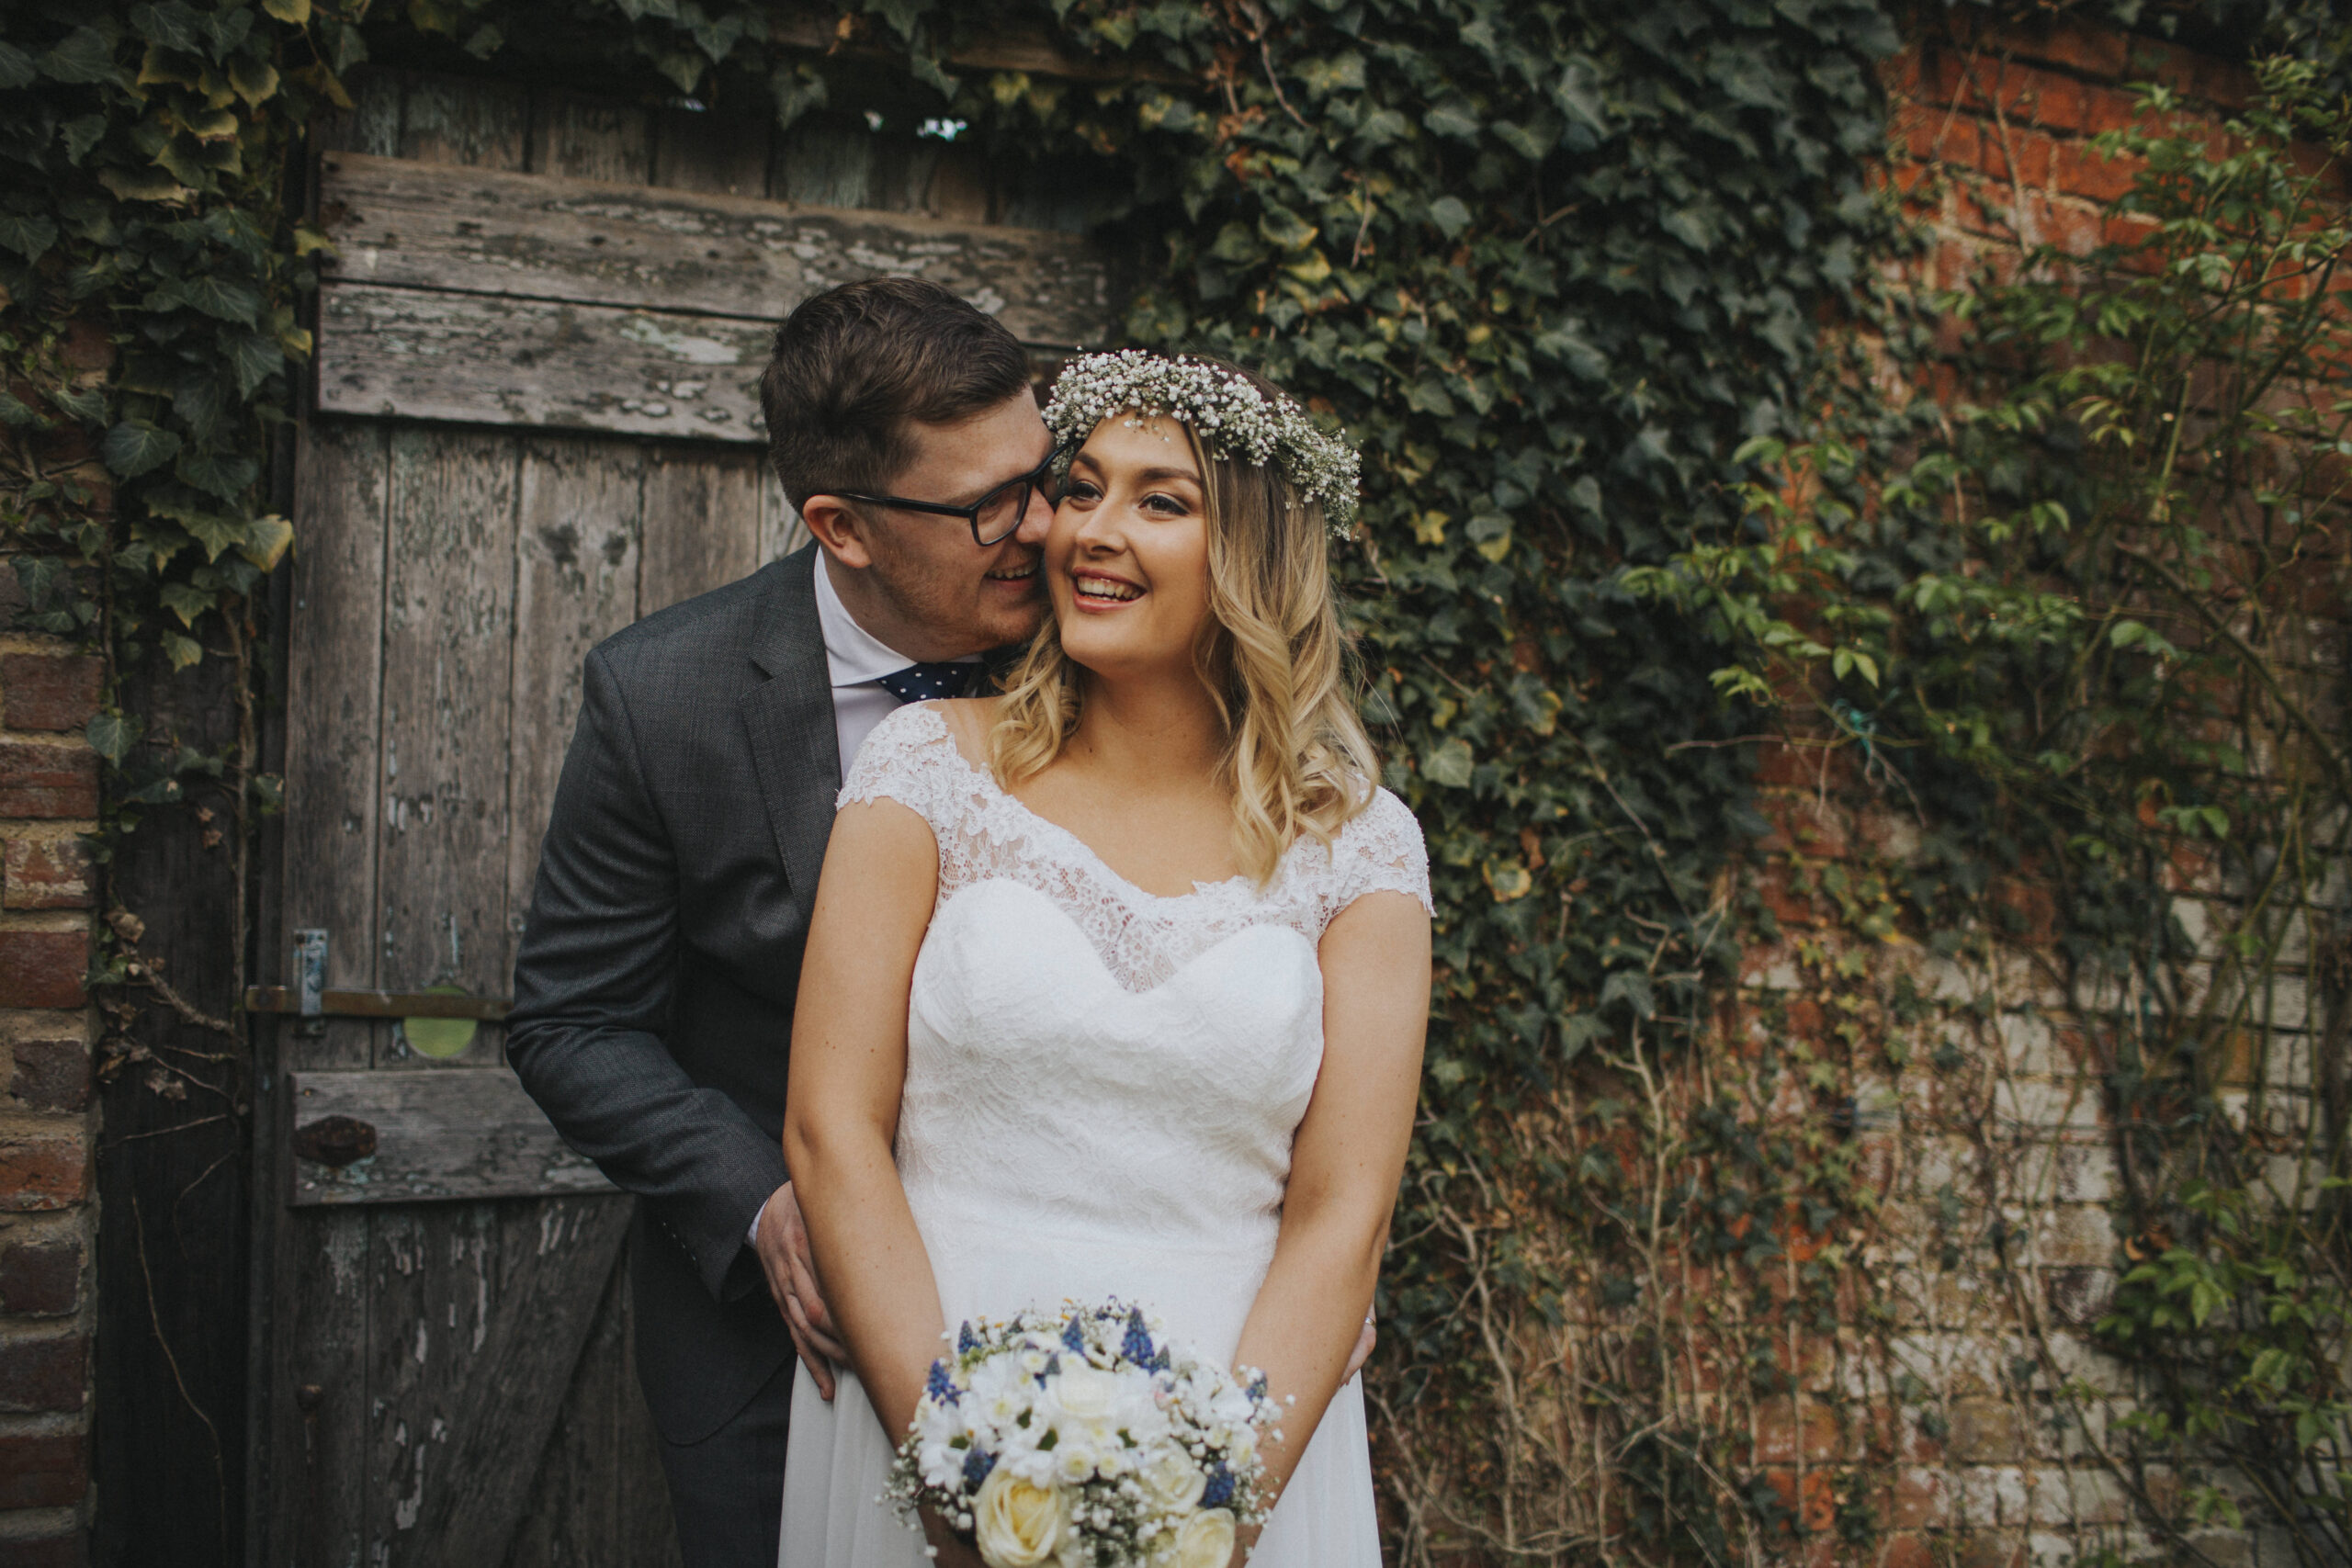 Intimate moments in a springtime celebration at Dodmoor House